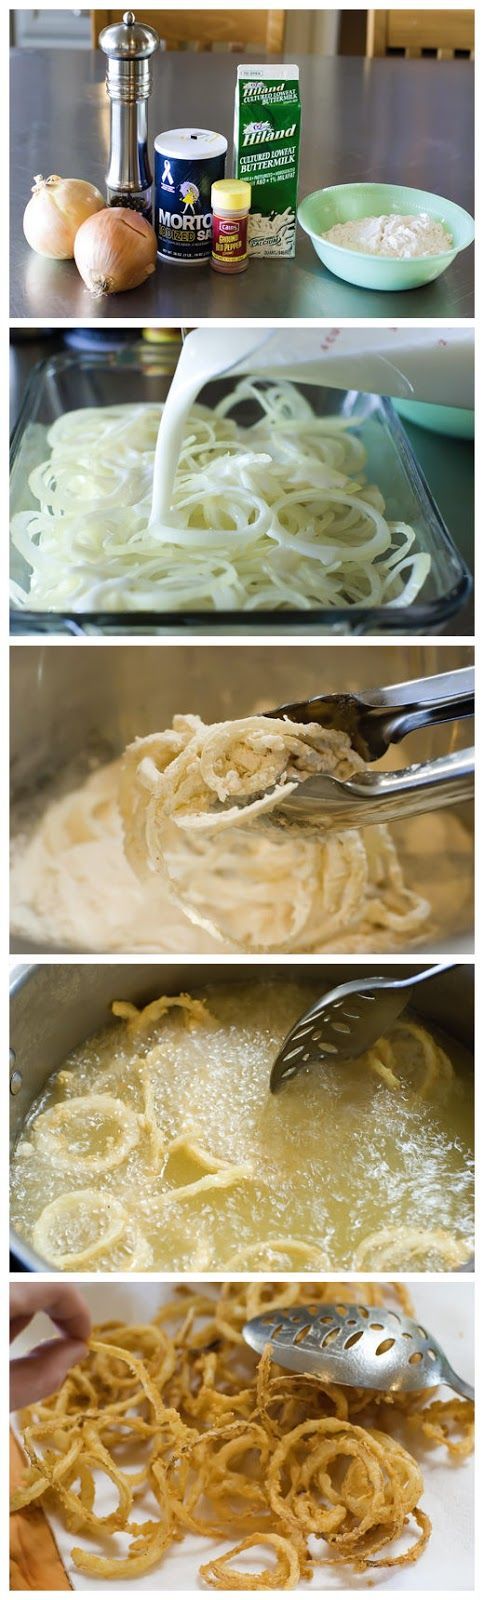 Onion Strings by the pioneer woman- full recipe text on her site is super!